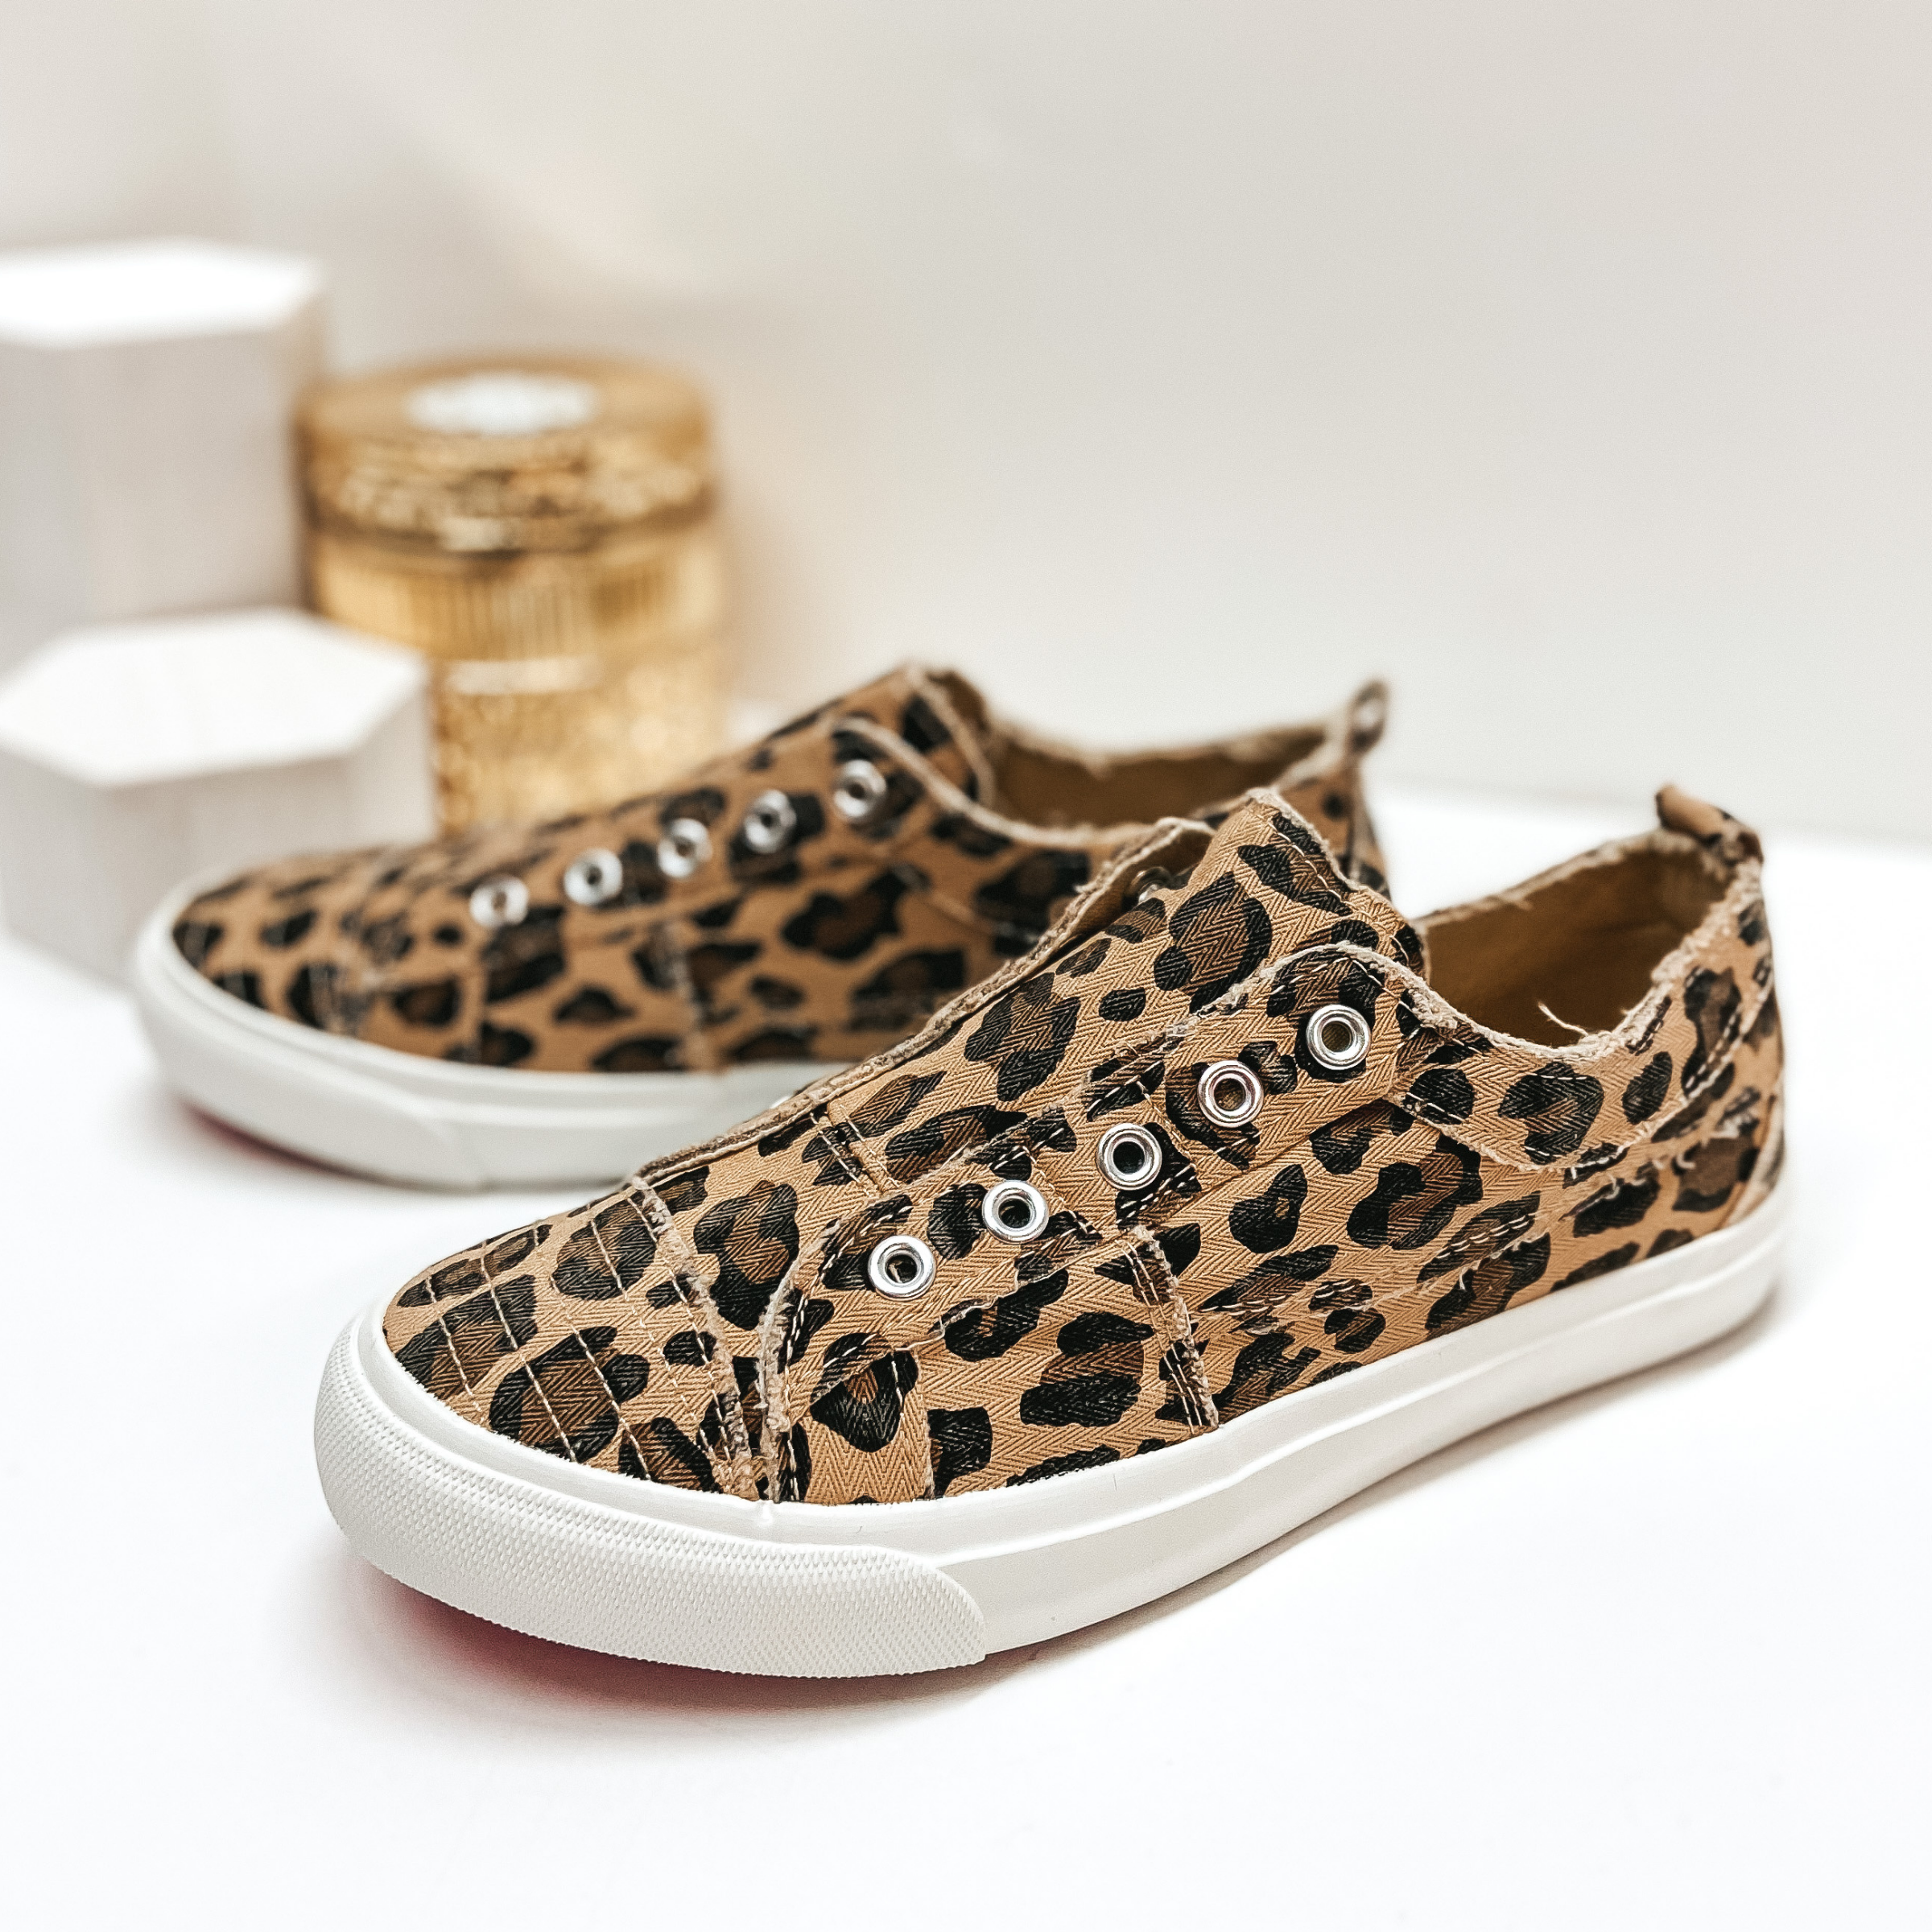 Last Chance Size 8 & 11 | Corky's | Babalu Slip On Sneakers in Leopard Print